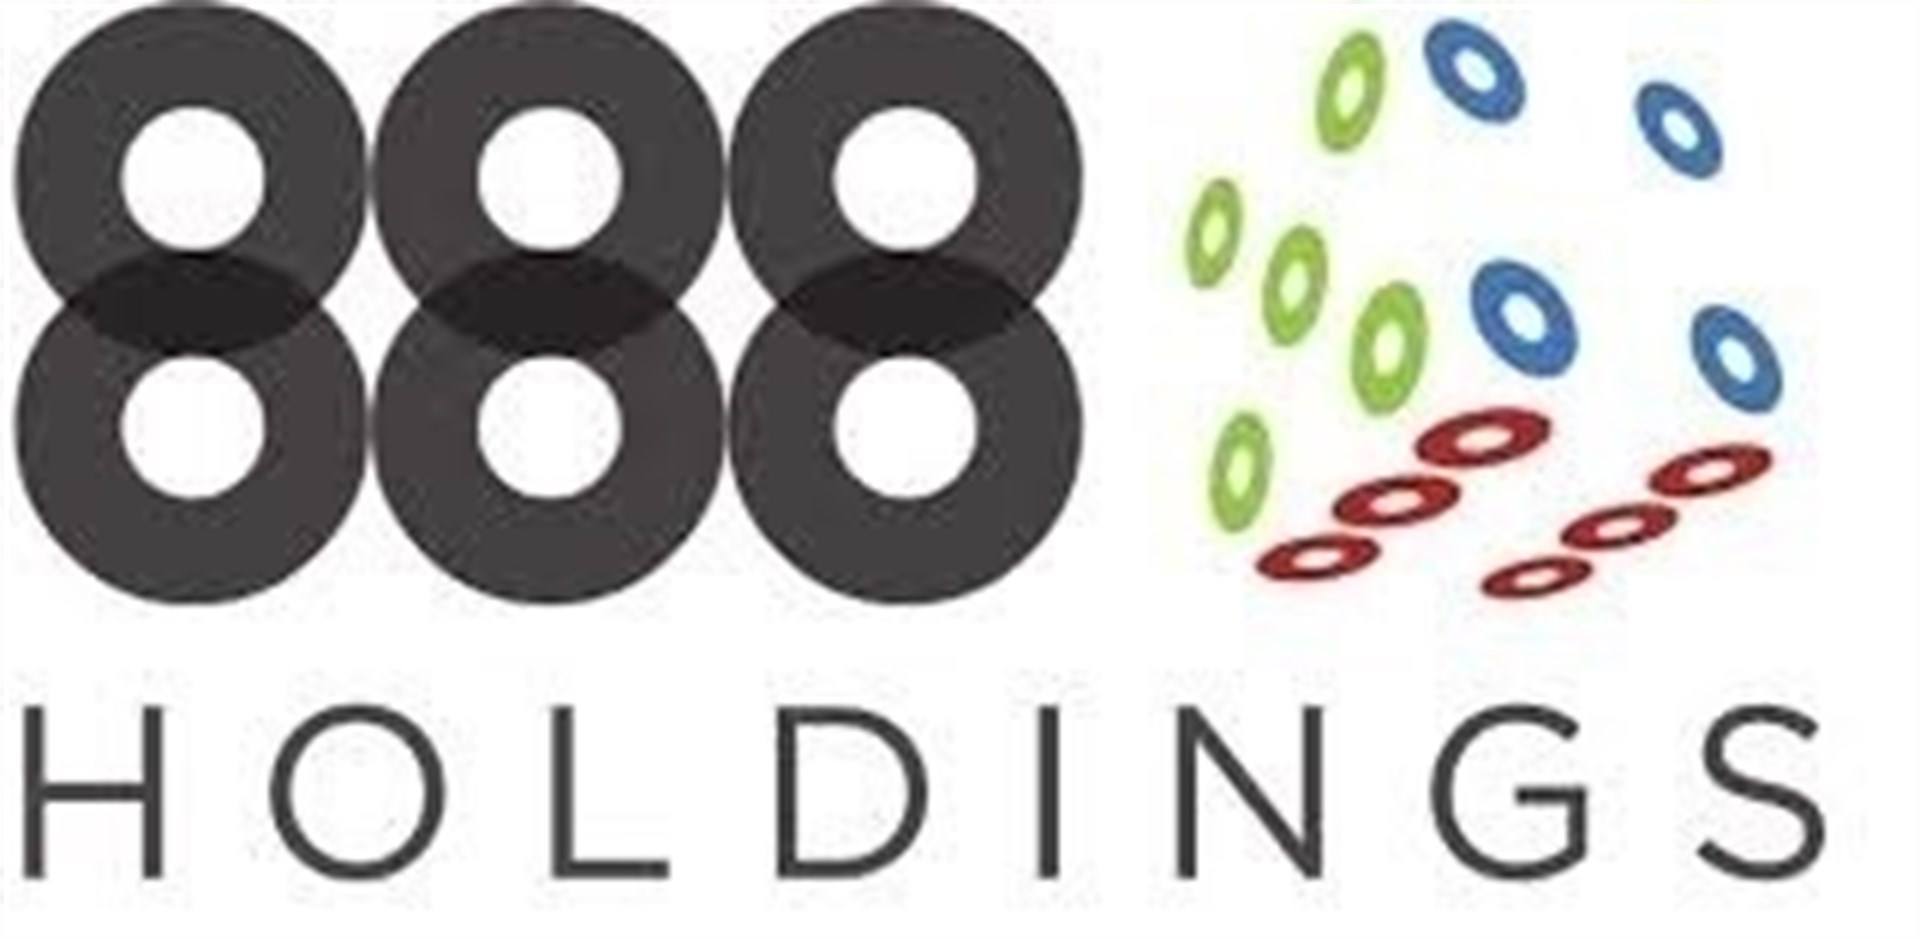 888 Holdings to quit Germany?